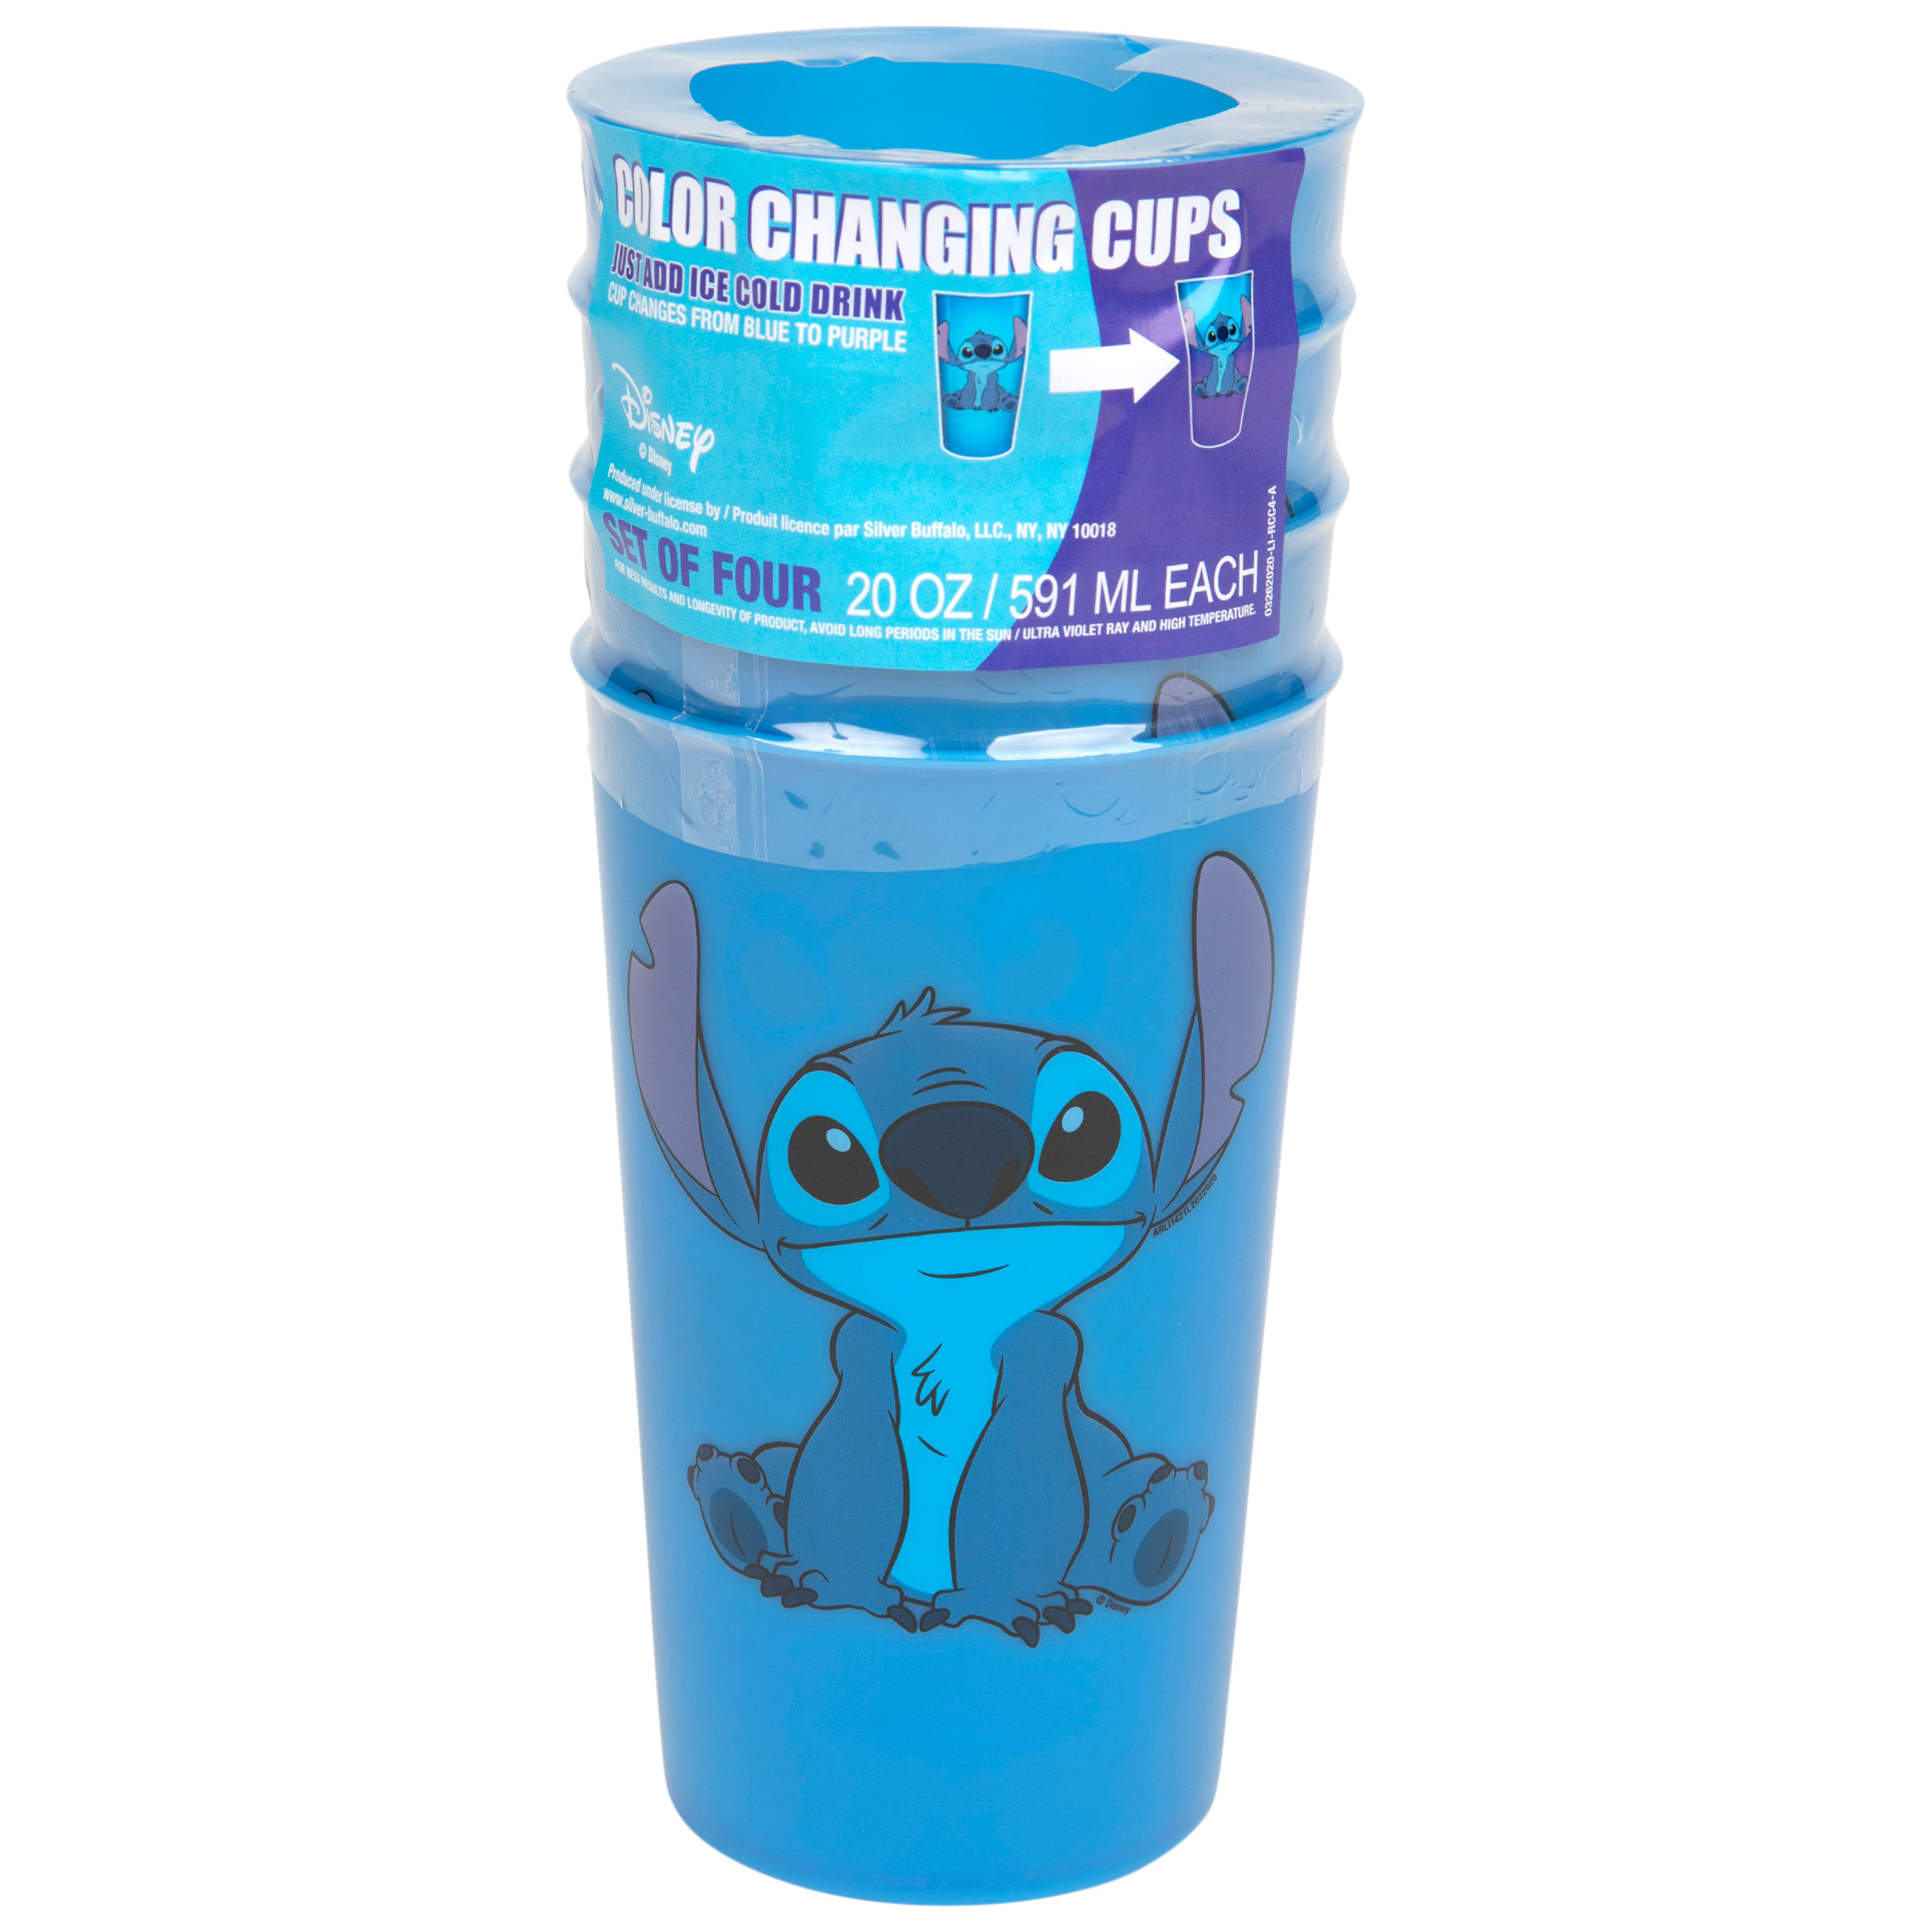 Lilo And Stitch 4 Pack Color Changing Cup